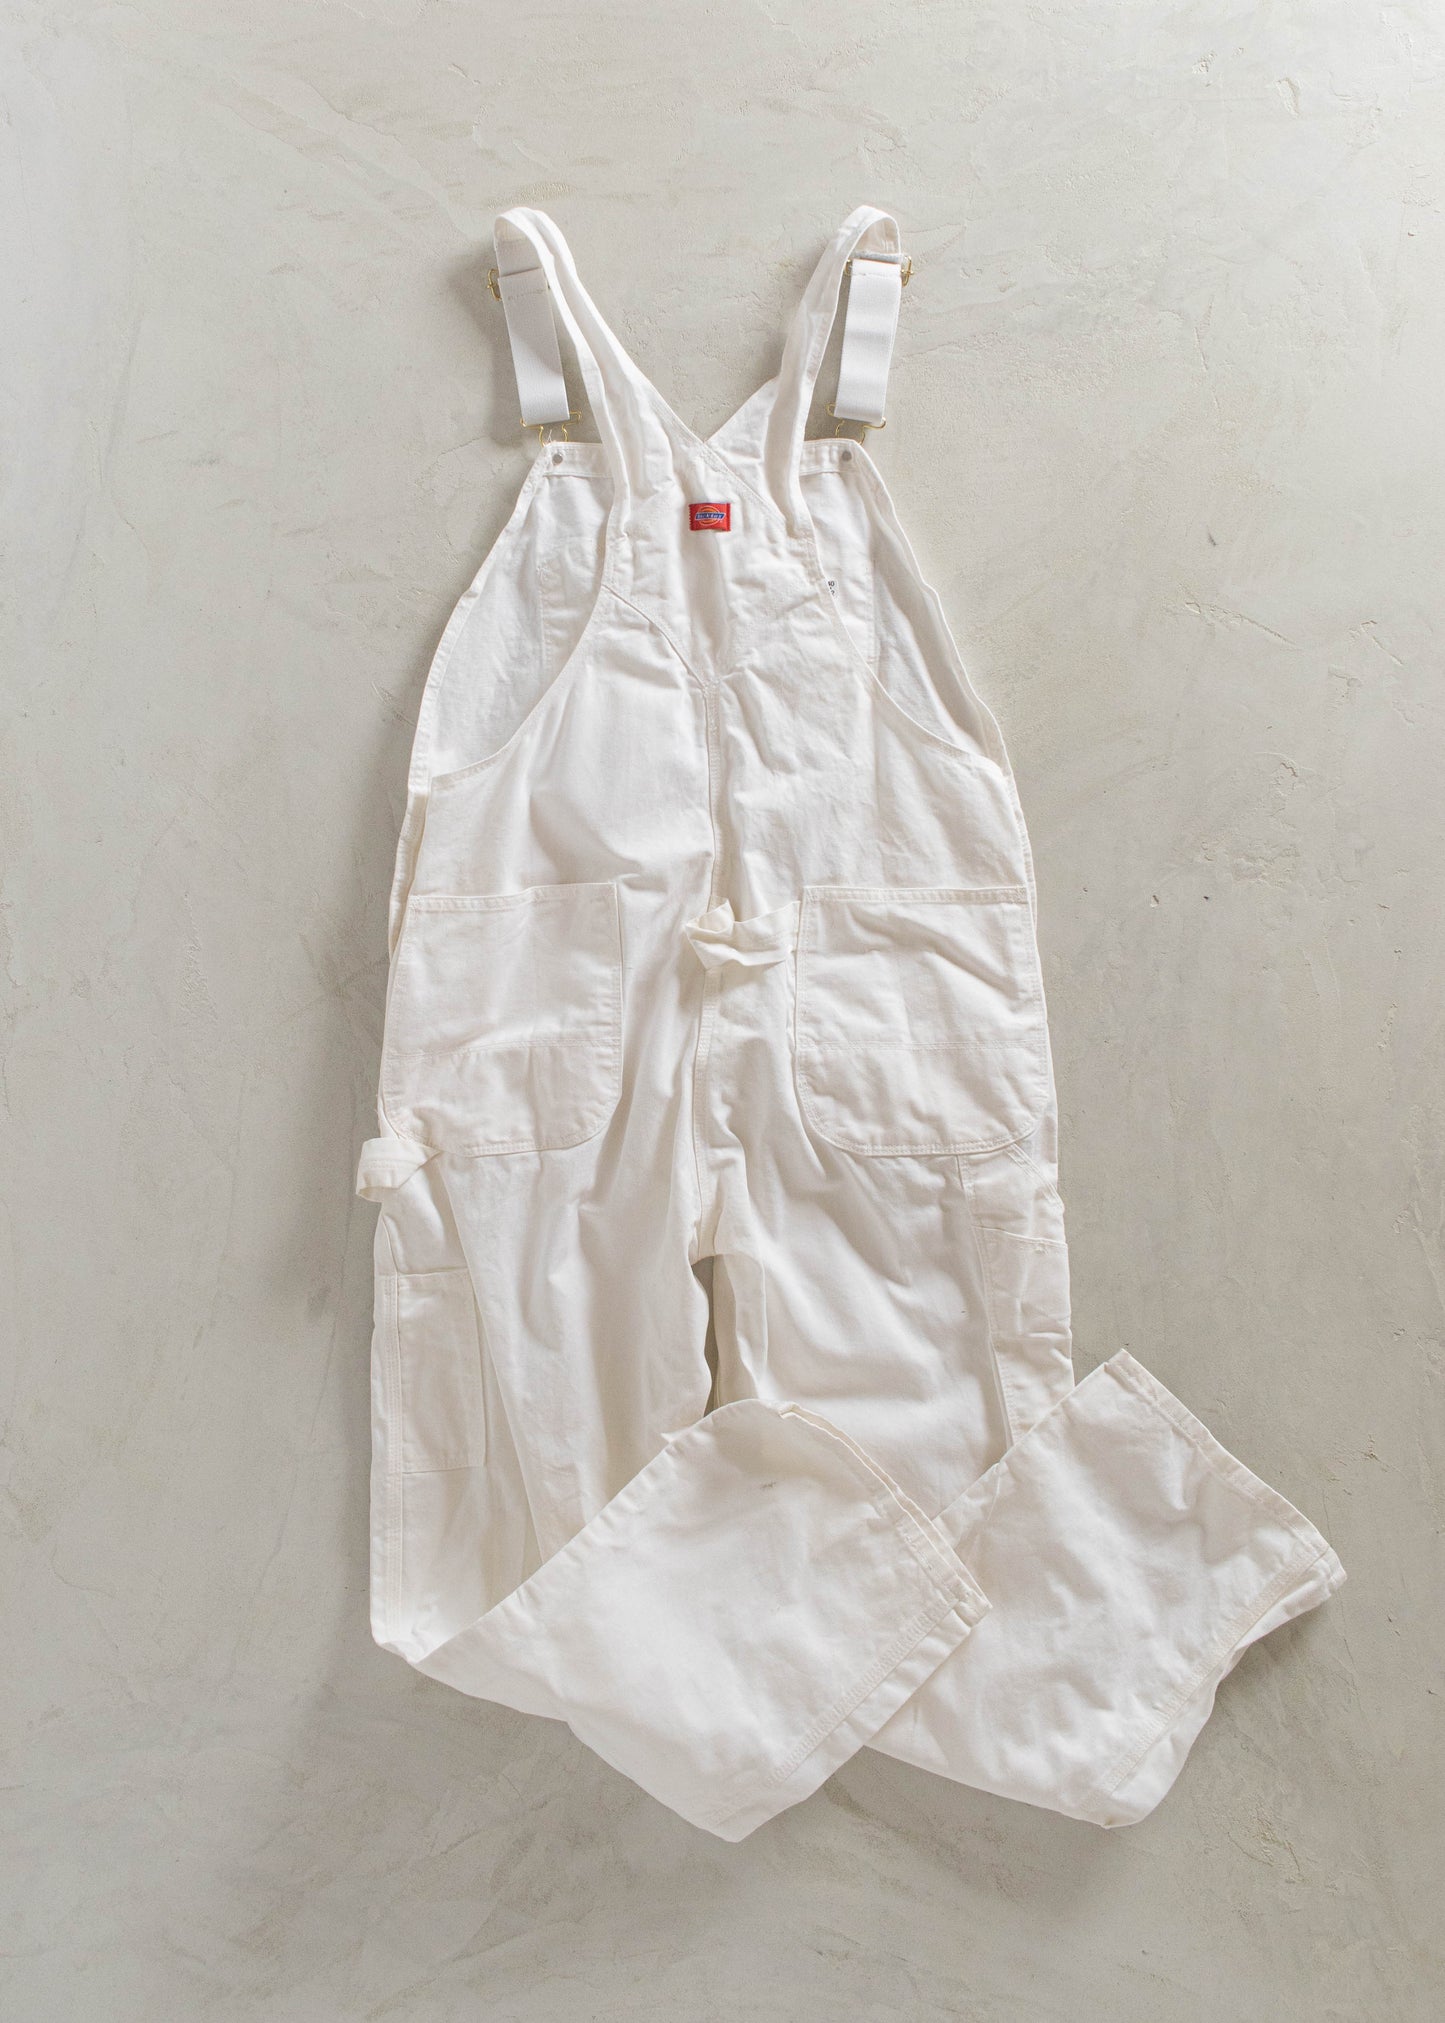 1990s Dickies Canvas Overalls Size XL/2XL